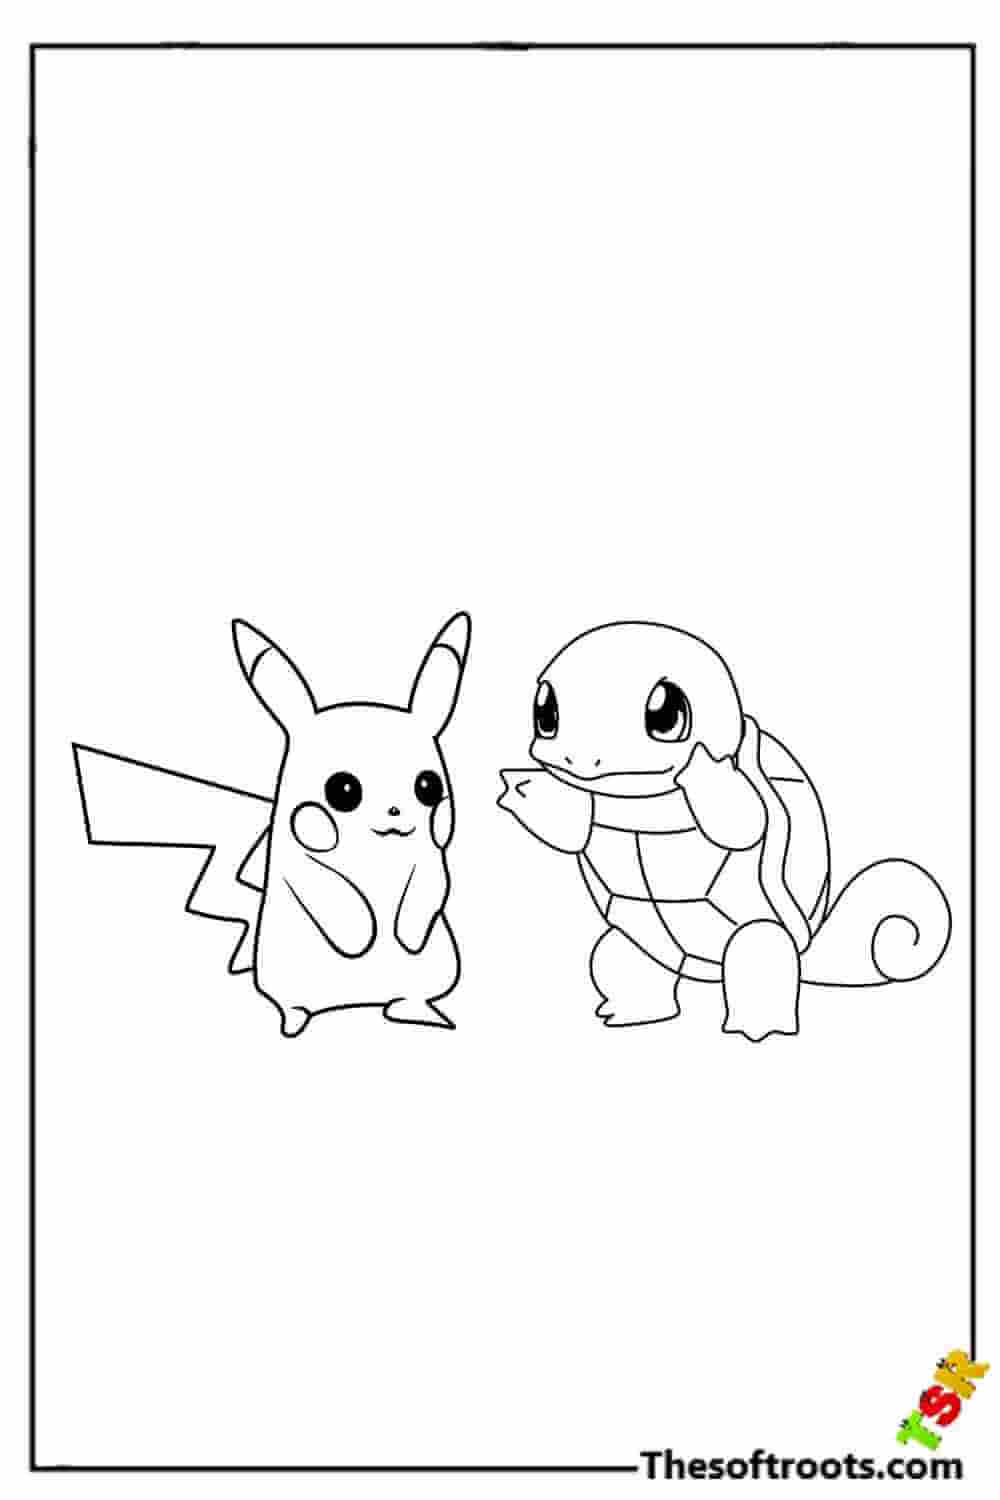 Pikachu and Squirtle coloring pages